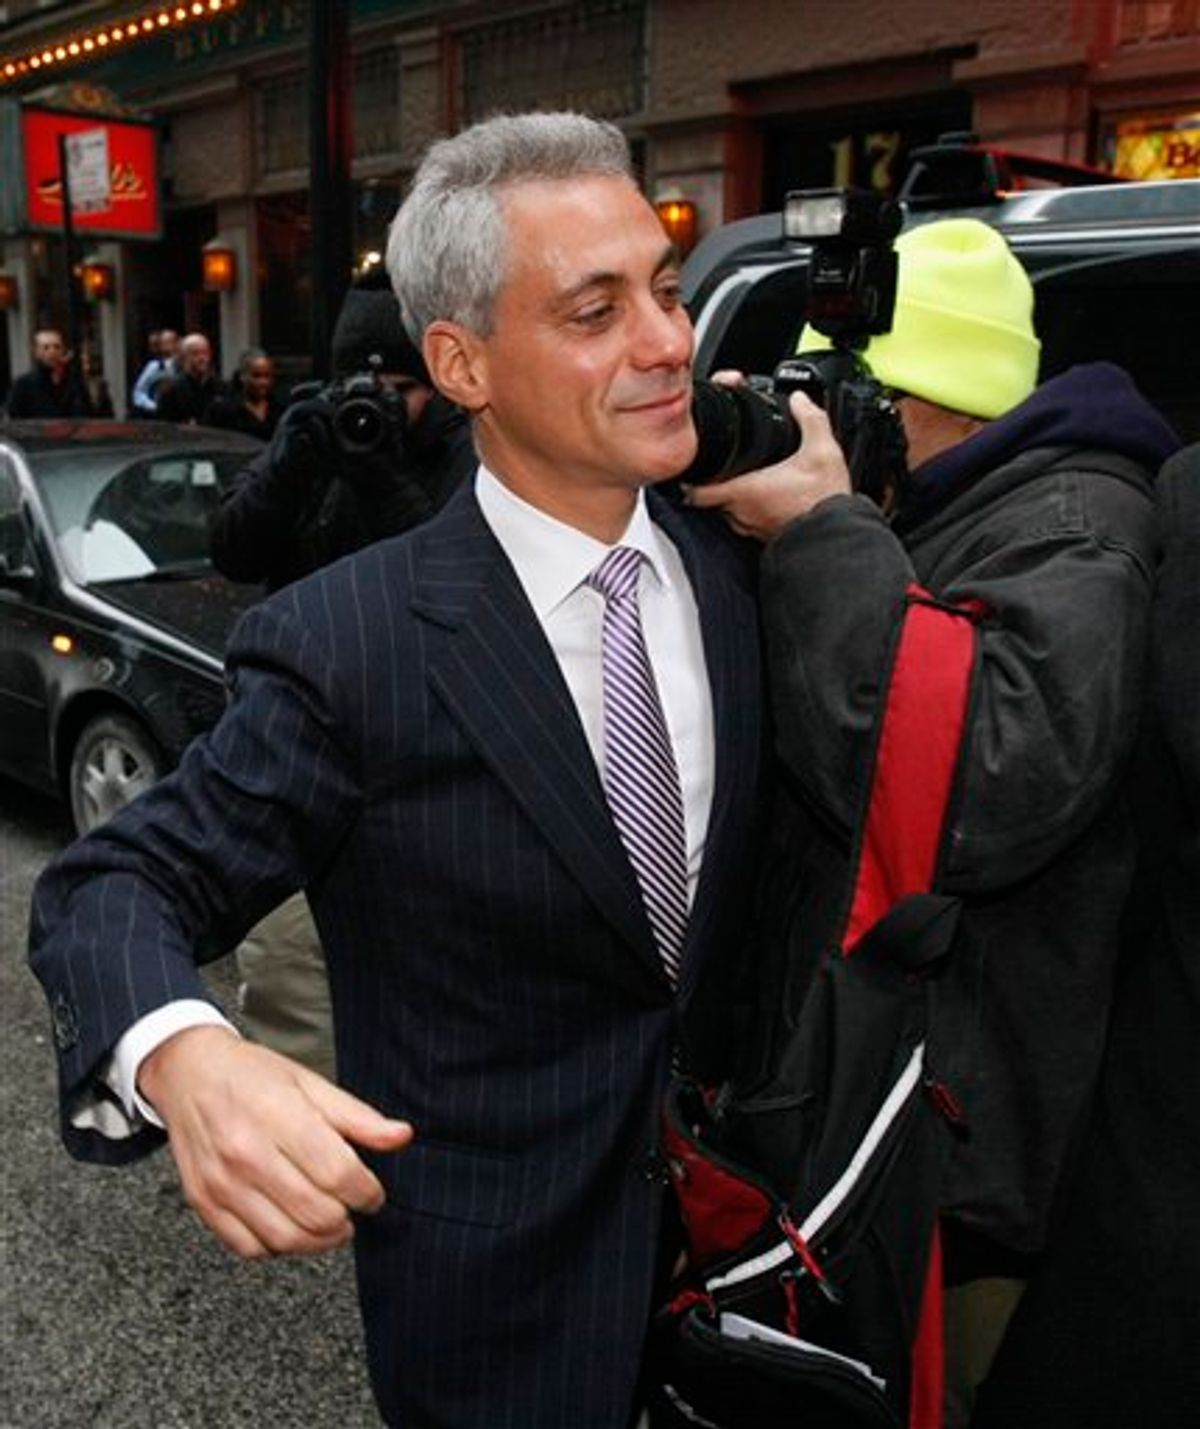 Former White House Chief of Staff Rahm Emanuel leaves a news conference in Chicago, Monday, Jan. 24, 2011, where he responded to an Illinois appeals court ruling that threw him off the ballot for Chicago mayor because he didn't live in the city in the year before the election. The court voted 2-1 to overturn a lower-court ruling that would have kept Emanuel's name on the Feb. 22 ballot. (AP Photo/Charles Rex Arbogast)           (AP)